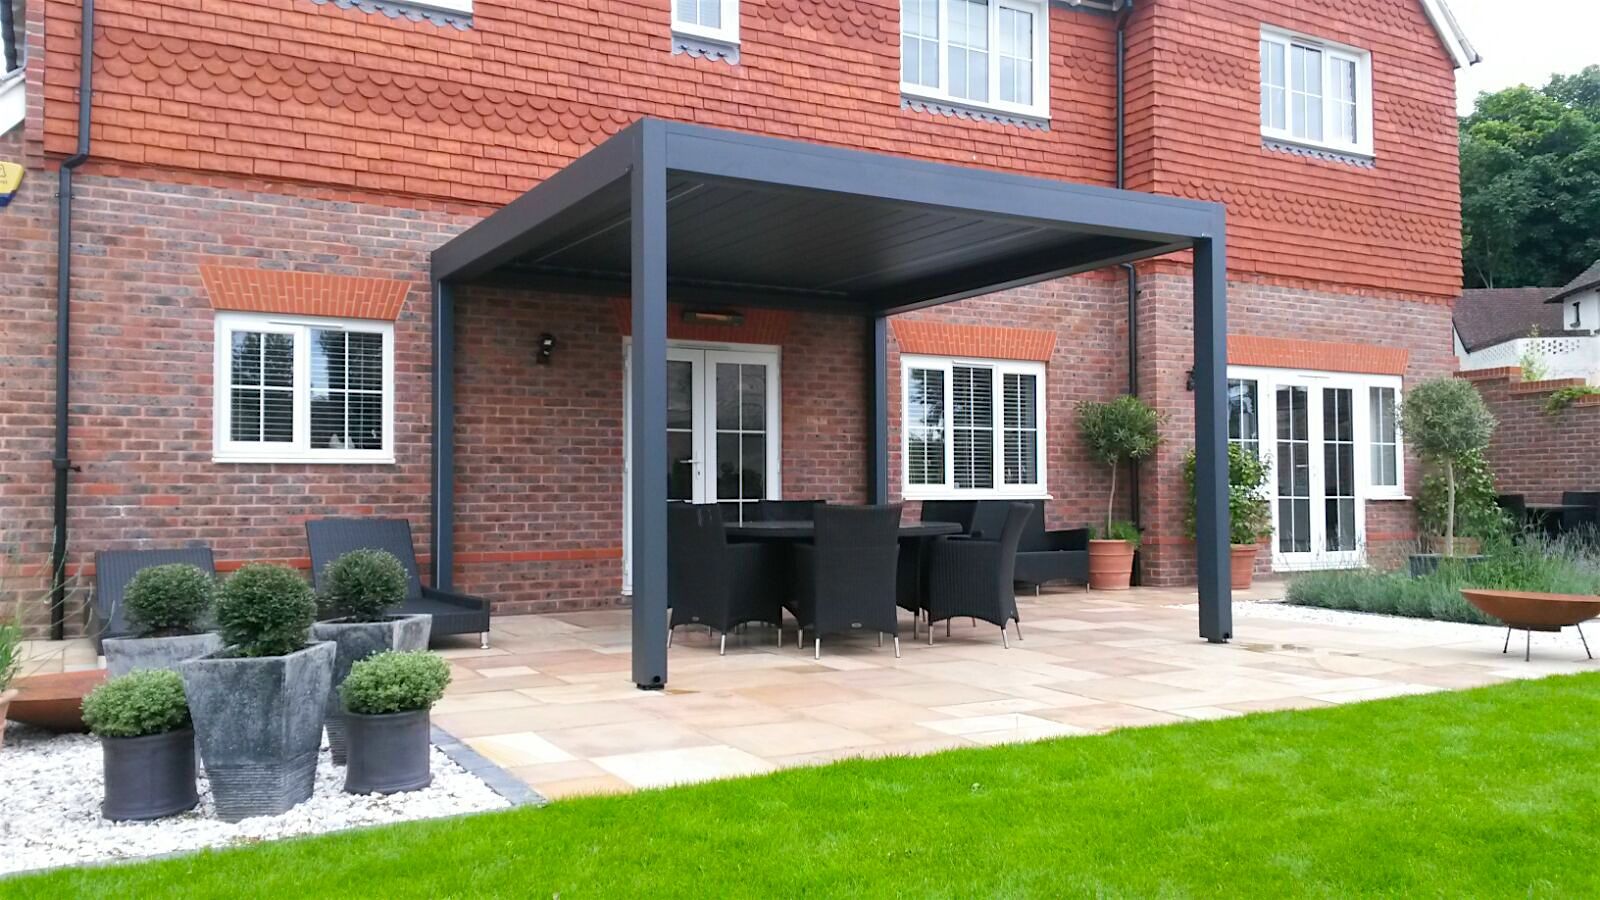 Outdoor Living Pod, Louvered Roof Patio Canopy Installation in Findon, West Sussex. homify Taman Modern outdoor living pod,louvered,roof,patio,terrace,canopy,garden,room